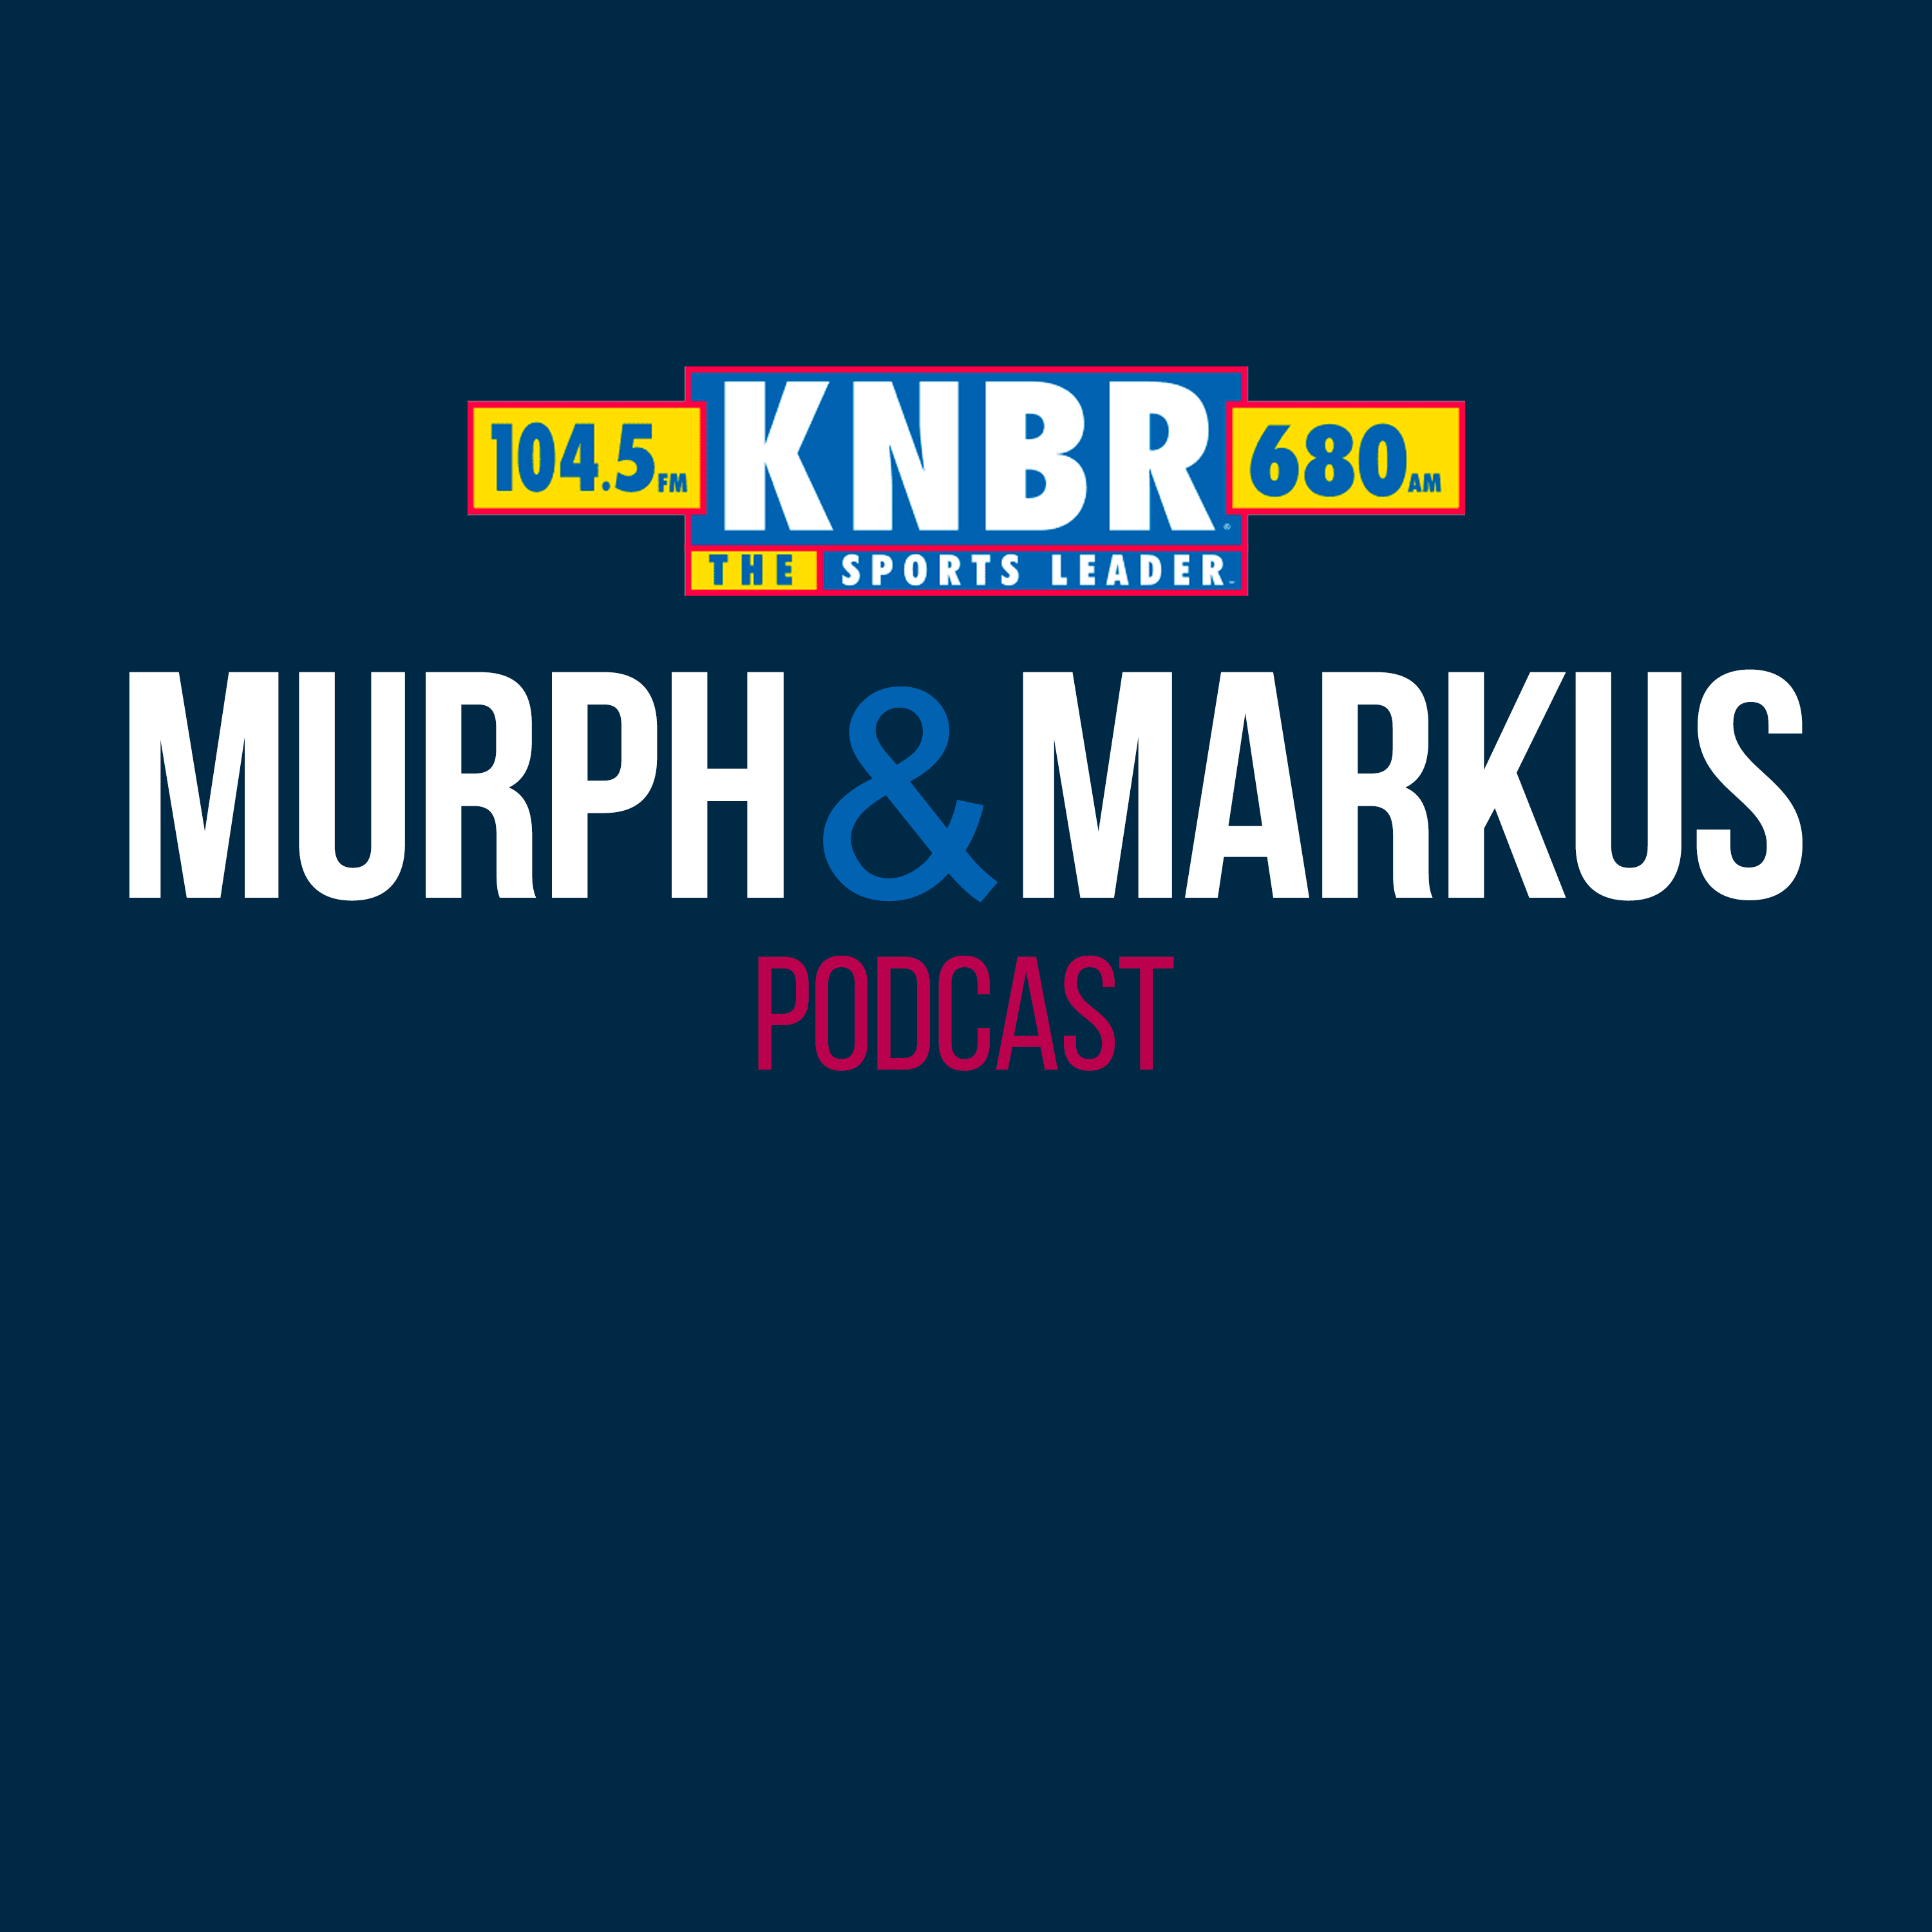 6-20 Hour 2: Murph & Markus react to some of Bob Kendrick's comments, then talk to Mayor Randall Woodfin, Spike Lee, and Bob Melvin